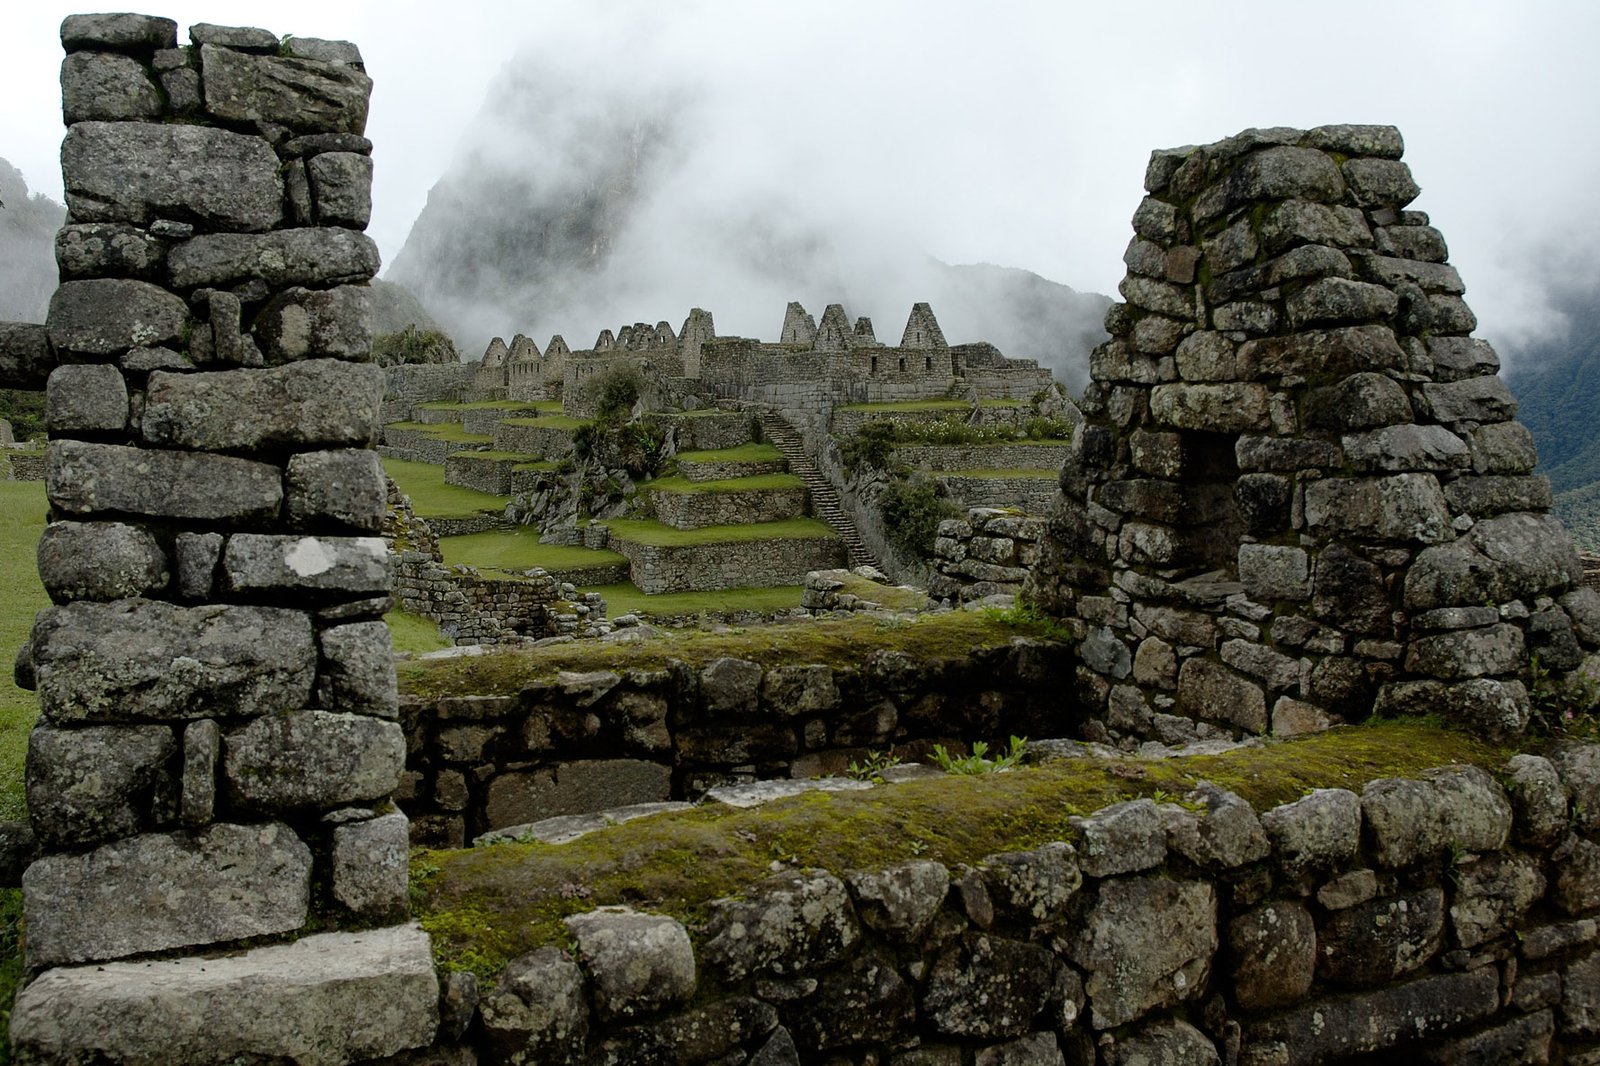 Machu Picchu was constructed on two fault lines